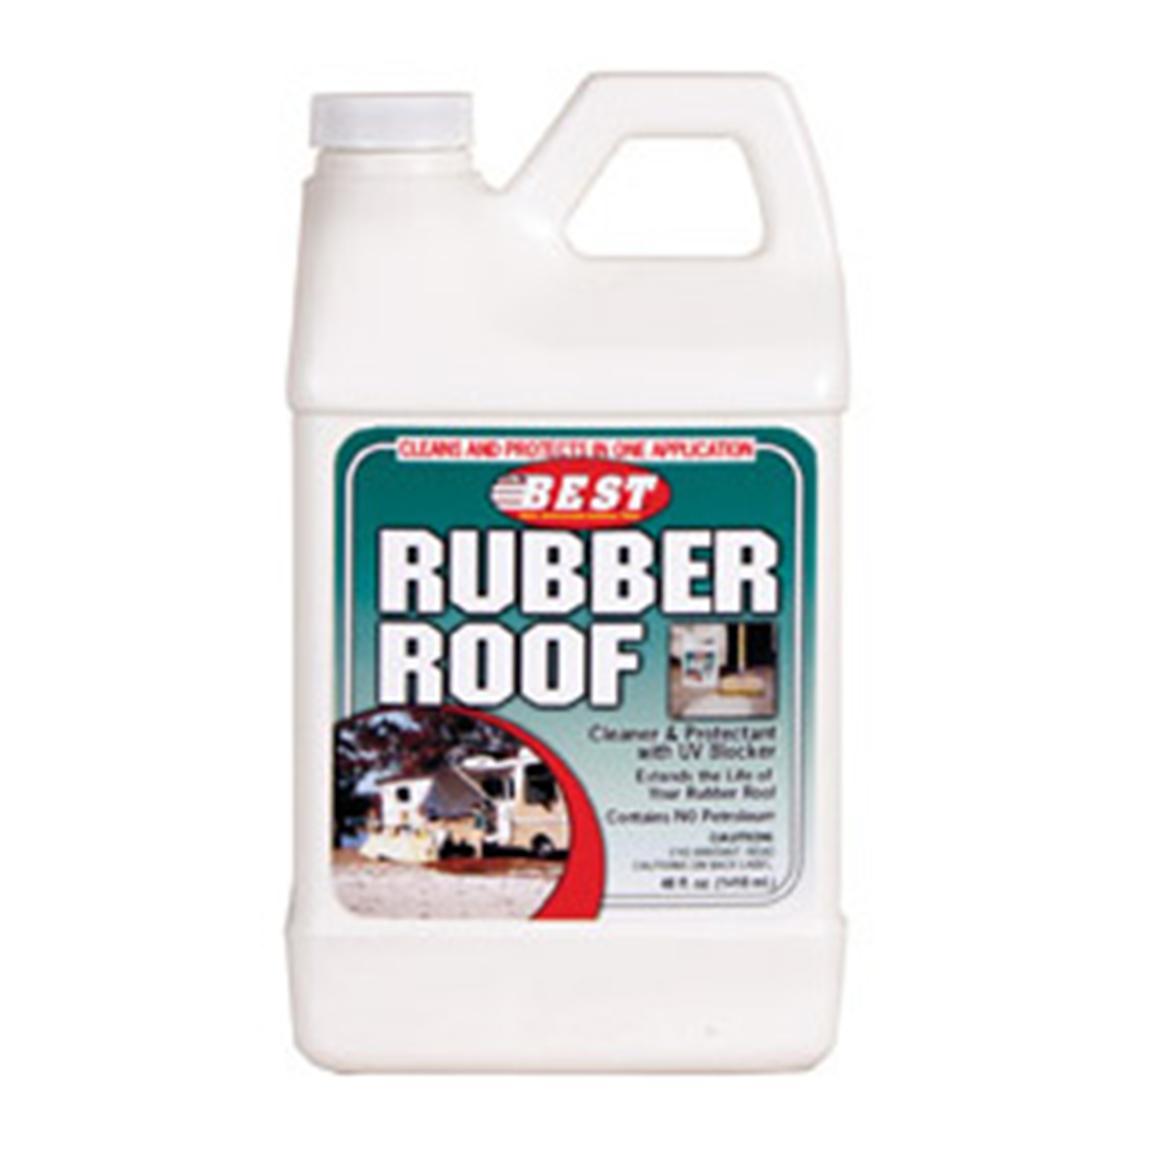 BEST® Rubber Roof Cleaner / Protectant - 161233, Cleaning Supplies at Best Rv Rubber Roof Cleaner And Protectant